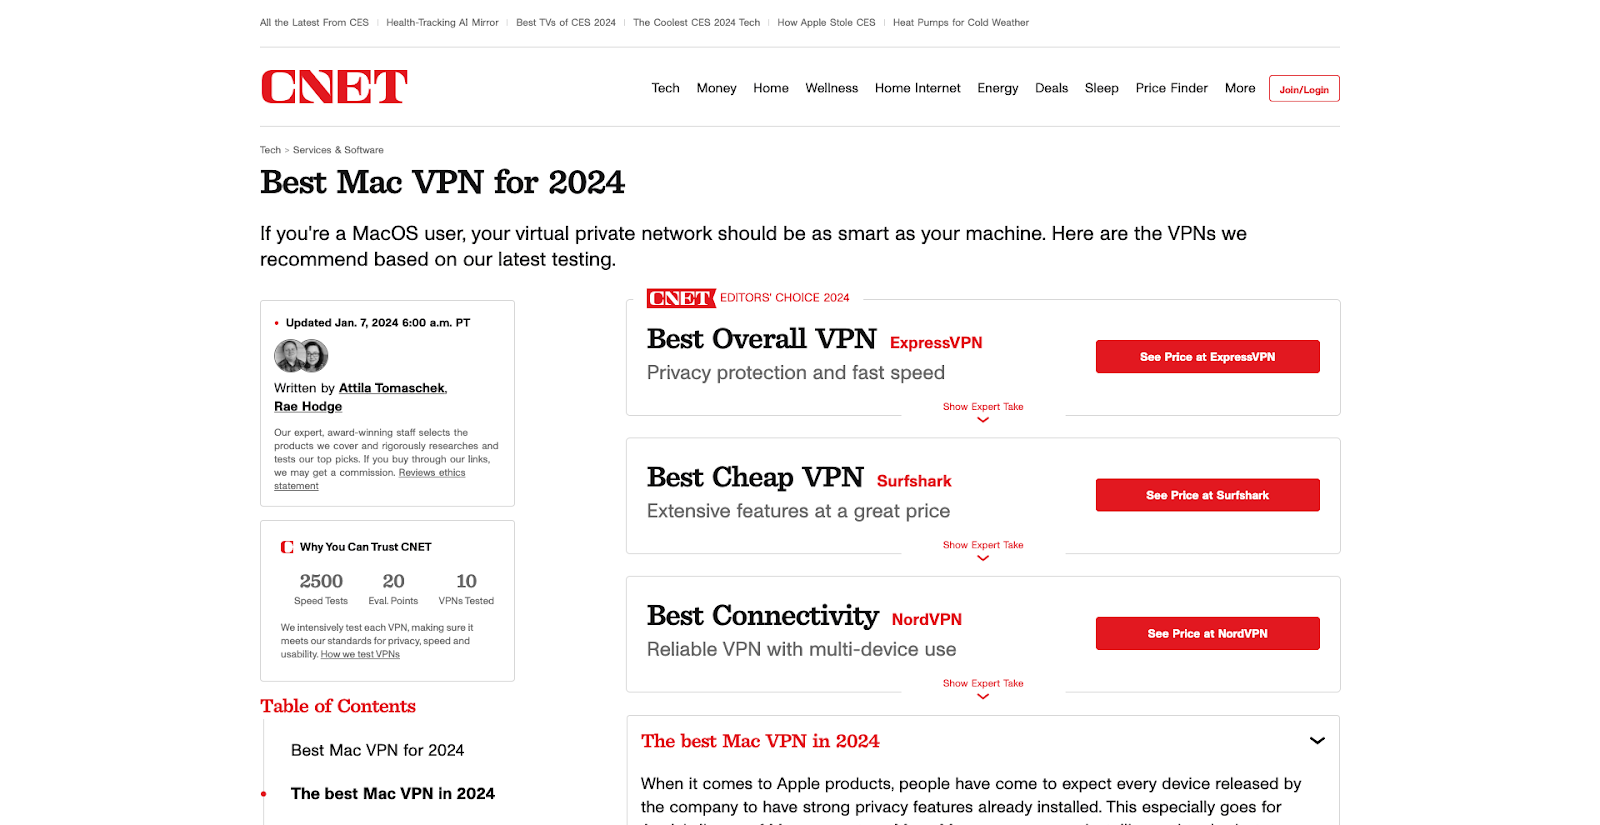 Best Mac VPN review page by CNET